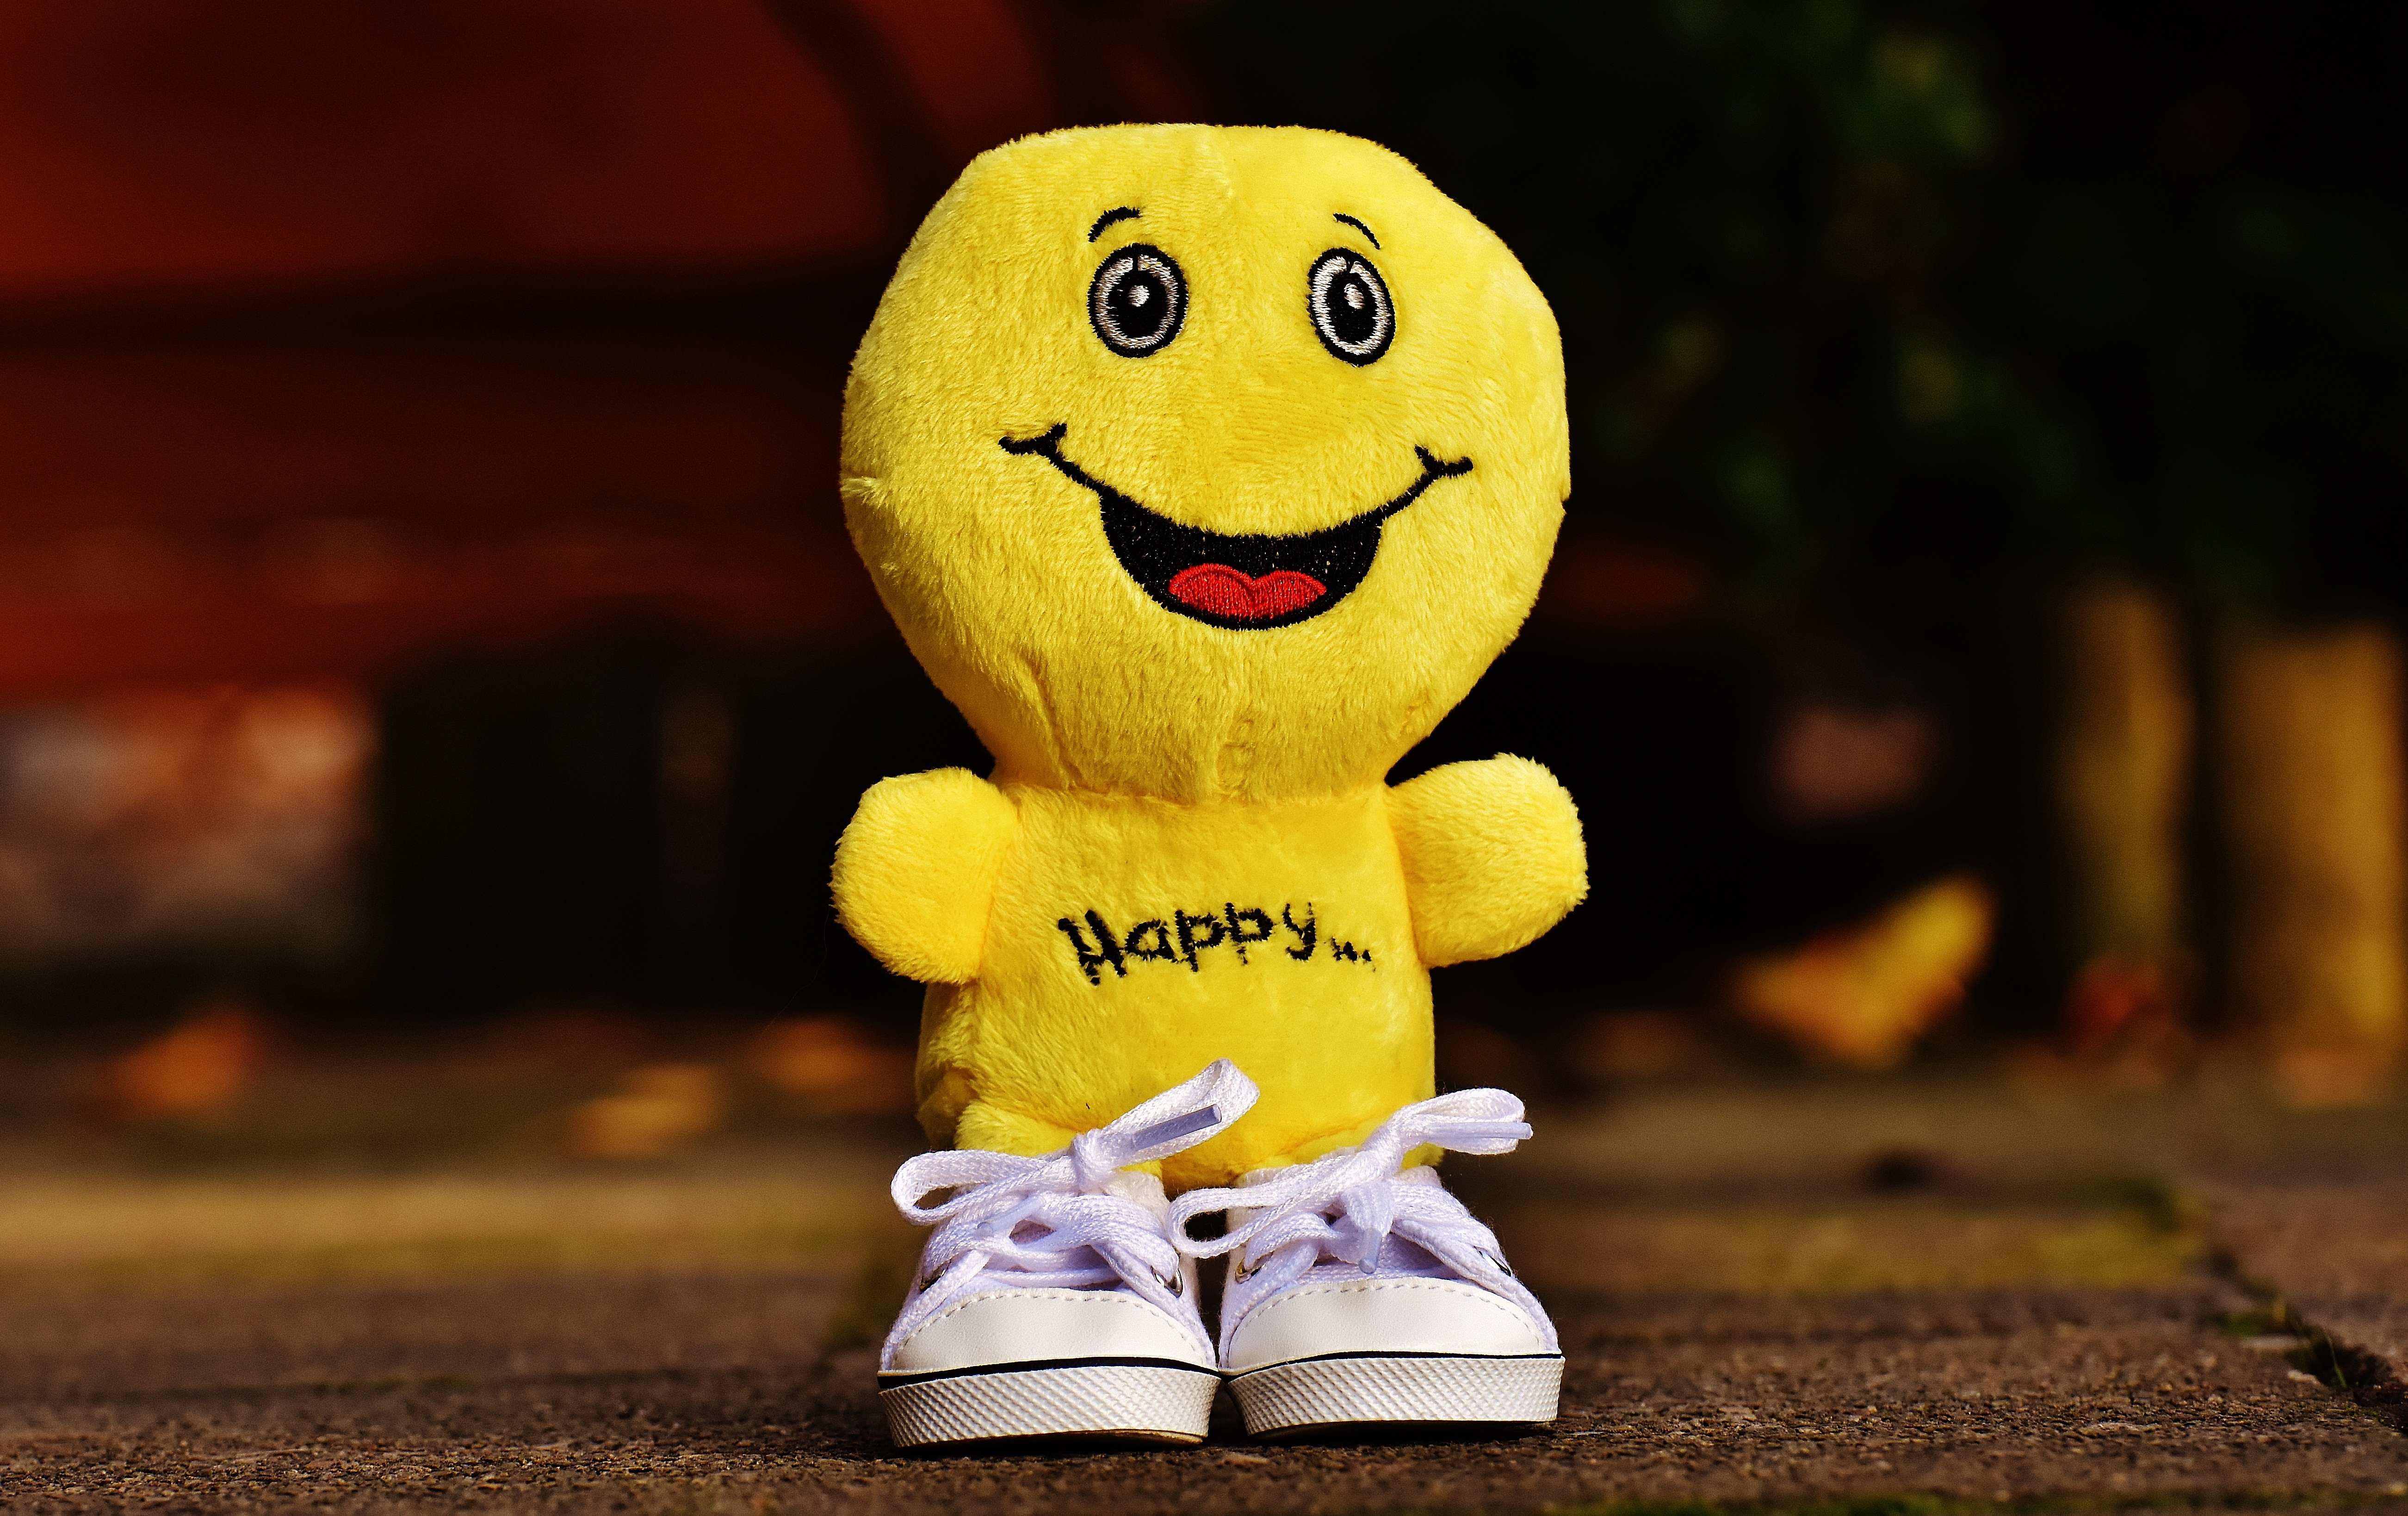 happiness, miscellanea, smiley, emoticon, toy, smile, miscellaneous cell phone wallpapers